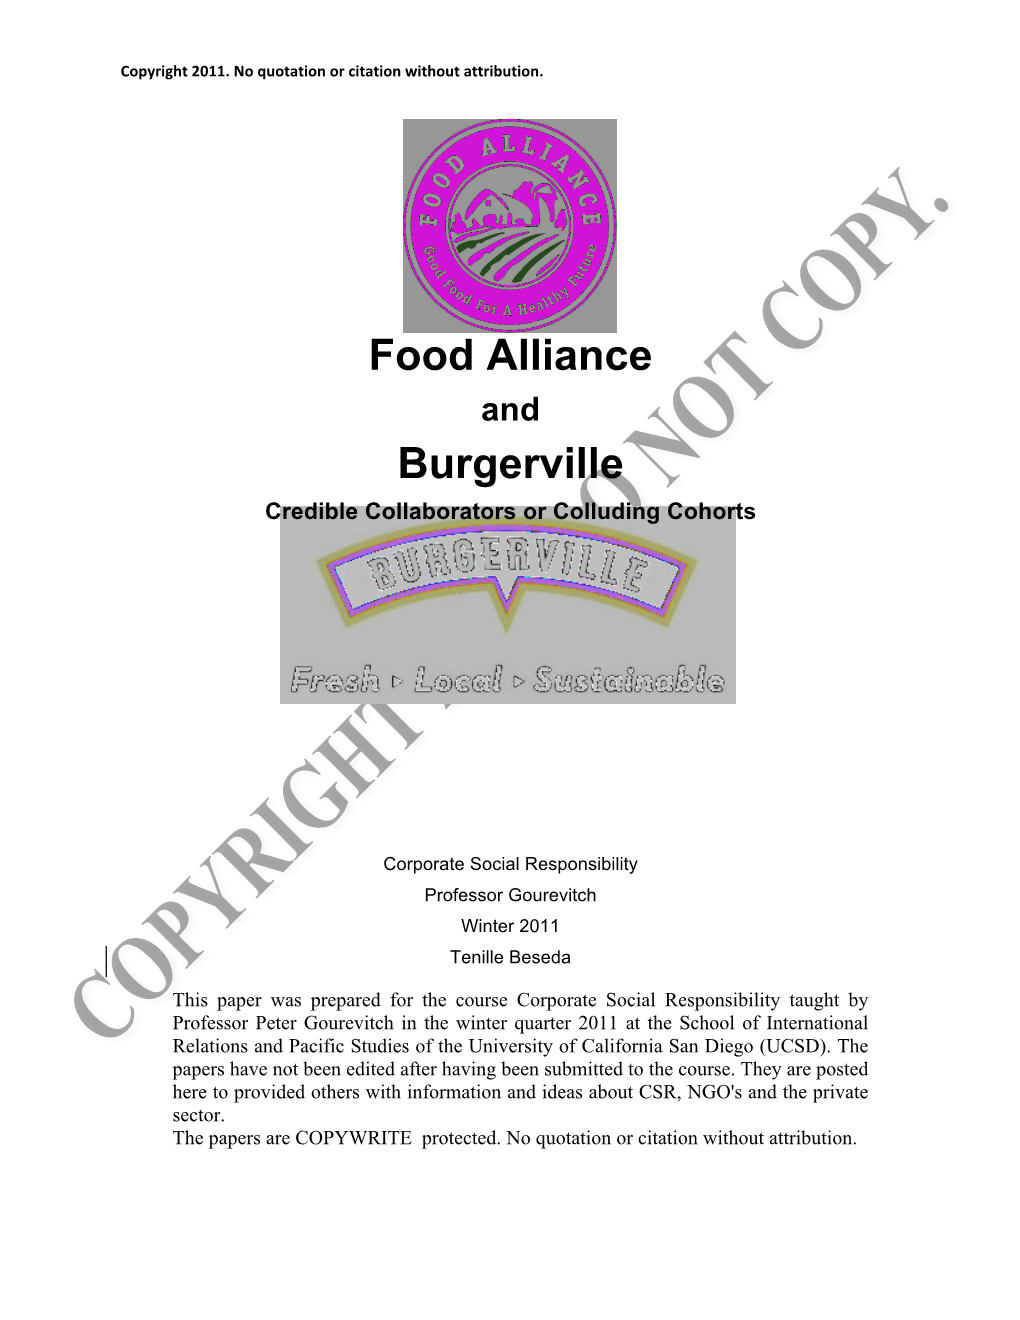 Food Alliance and Burgerville Credible Collaborators Or Colluding Cohorts